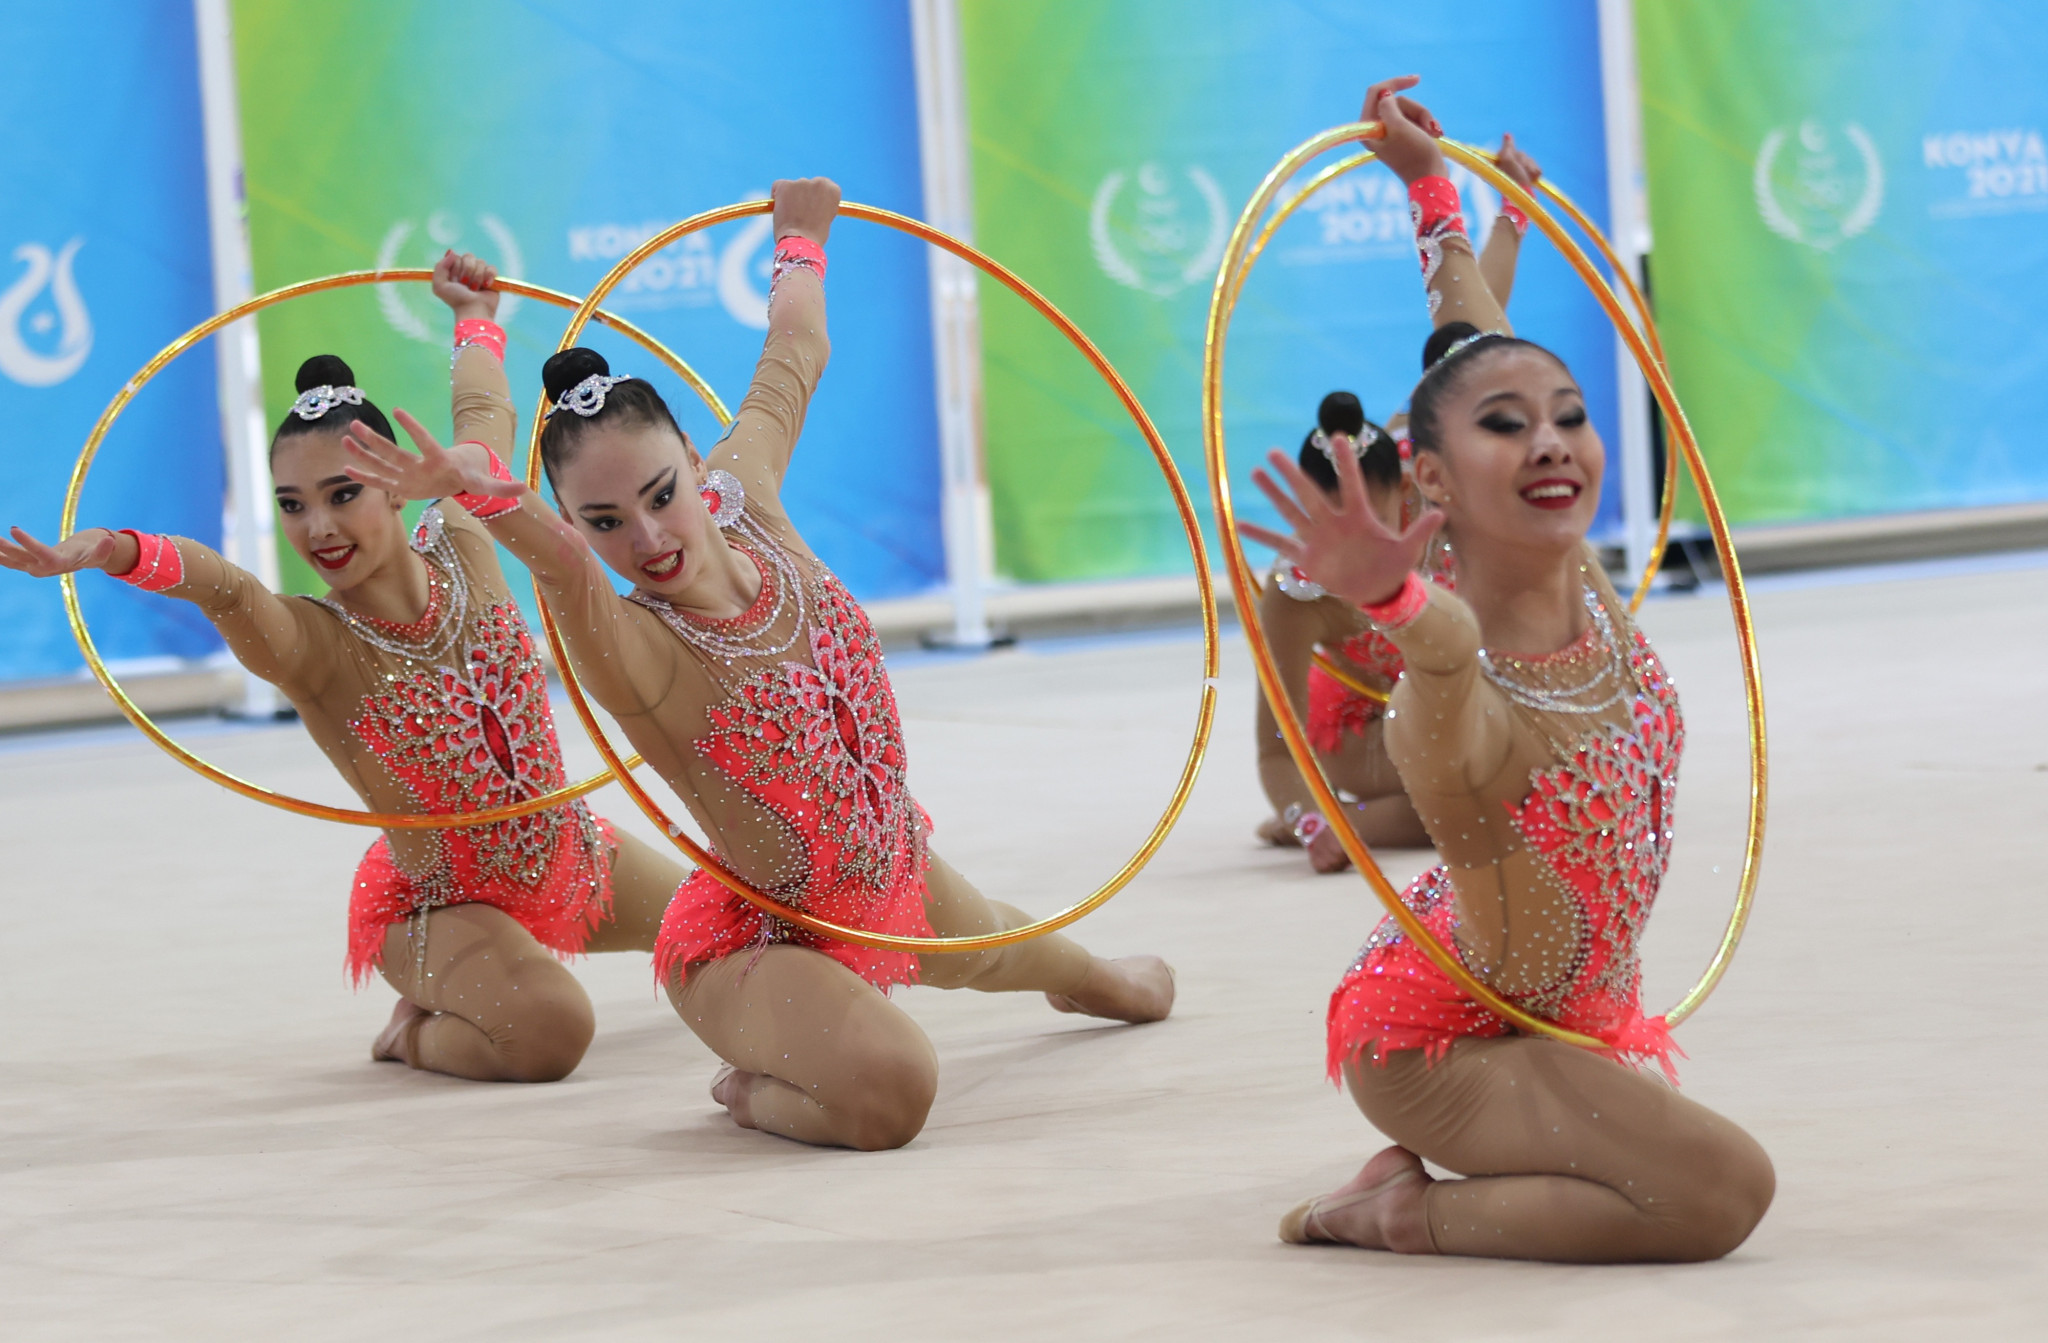 Rhythmic gymanstics finals continued with athletes competing in the hoop discipline ©Konya 2021